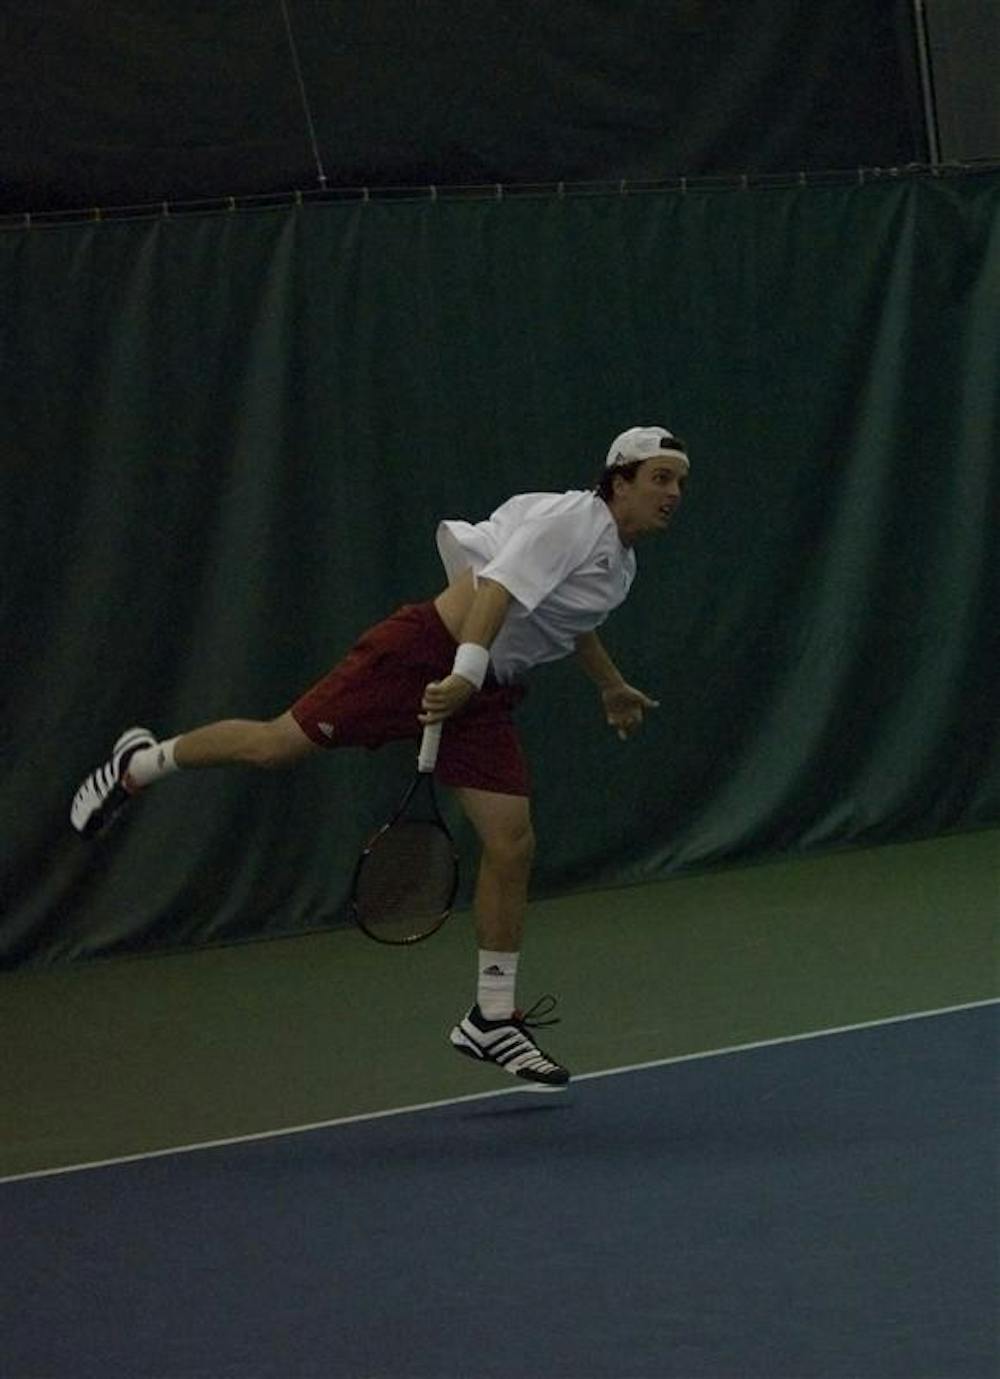 Sophomore Lachlan Ferguson completes a serve during a singles match against Eastern Kentucky University January 17, 2009.